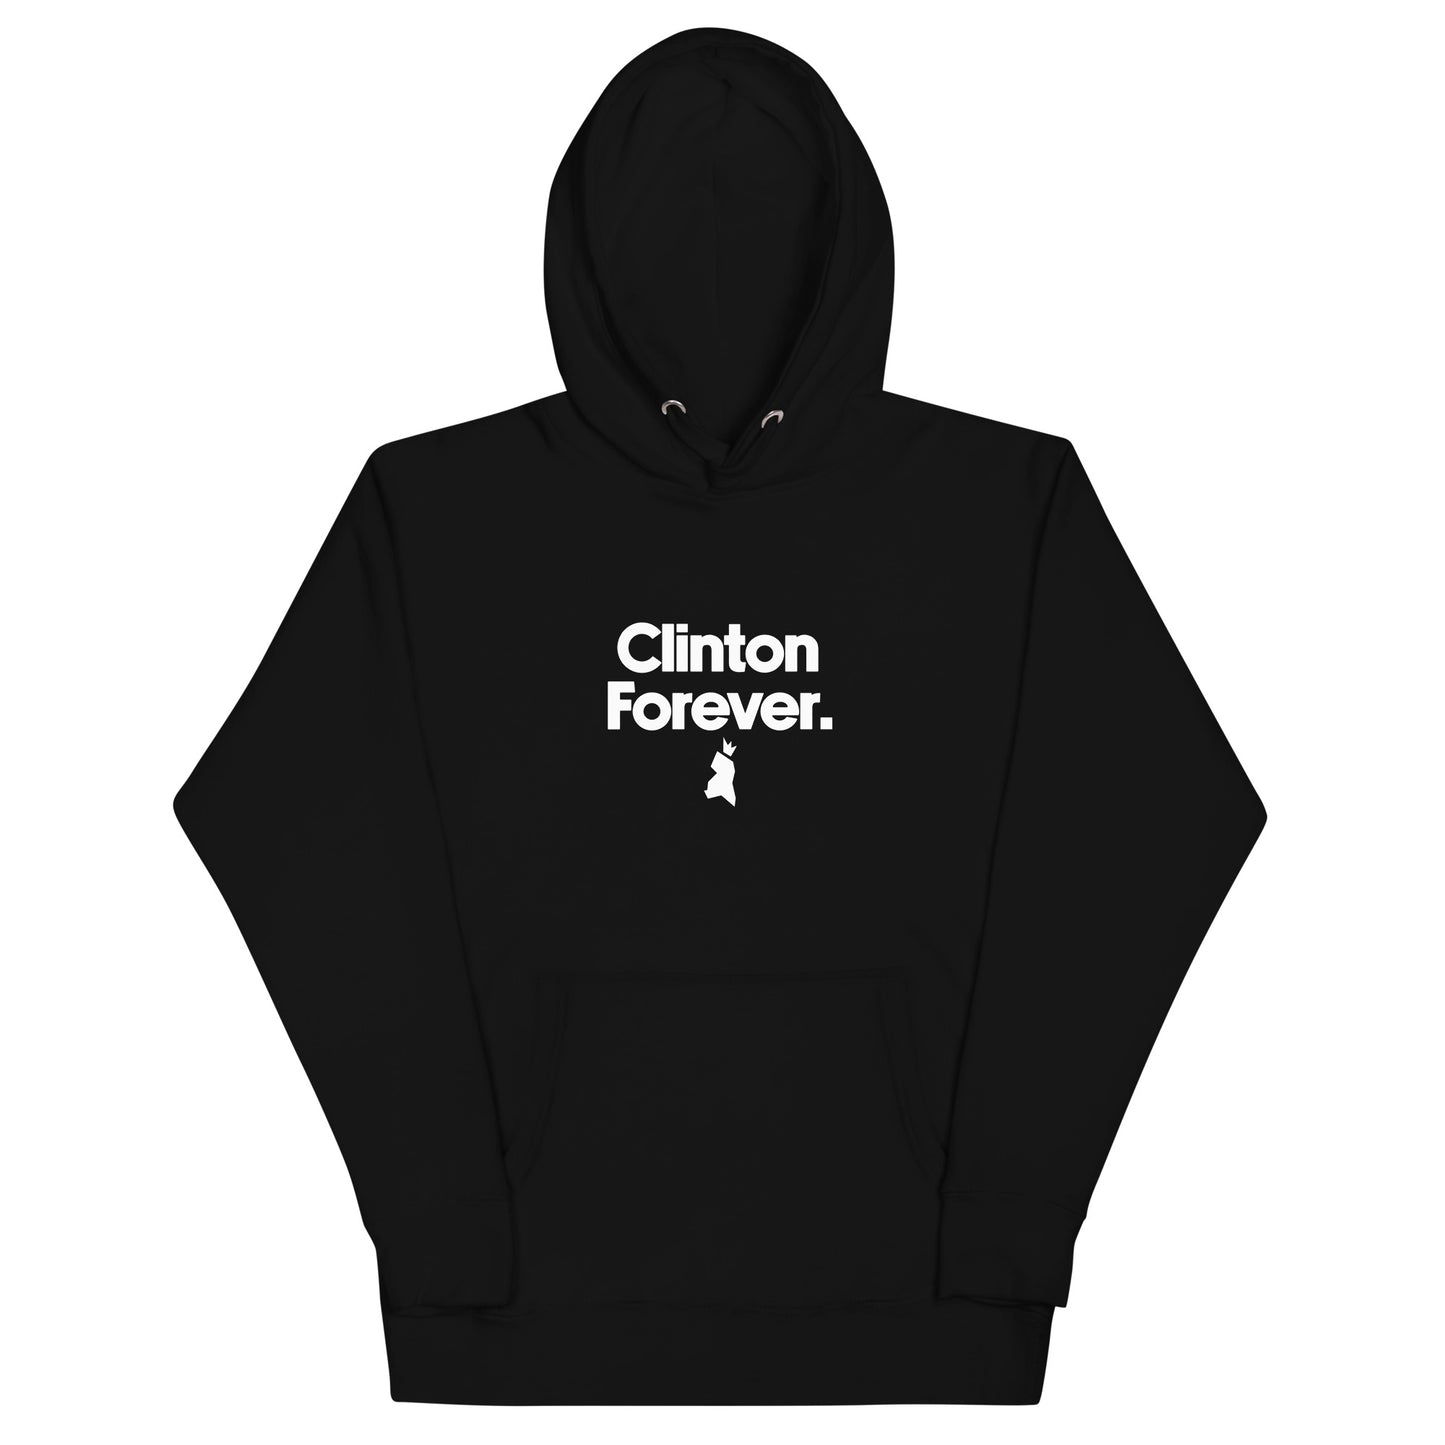 Clinton Forever Unisex Hoodie